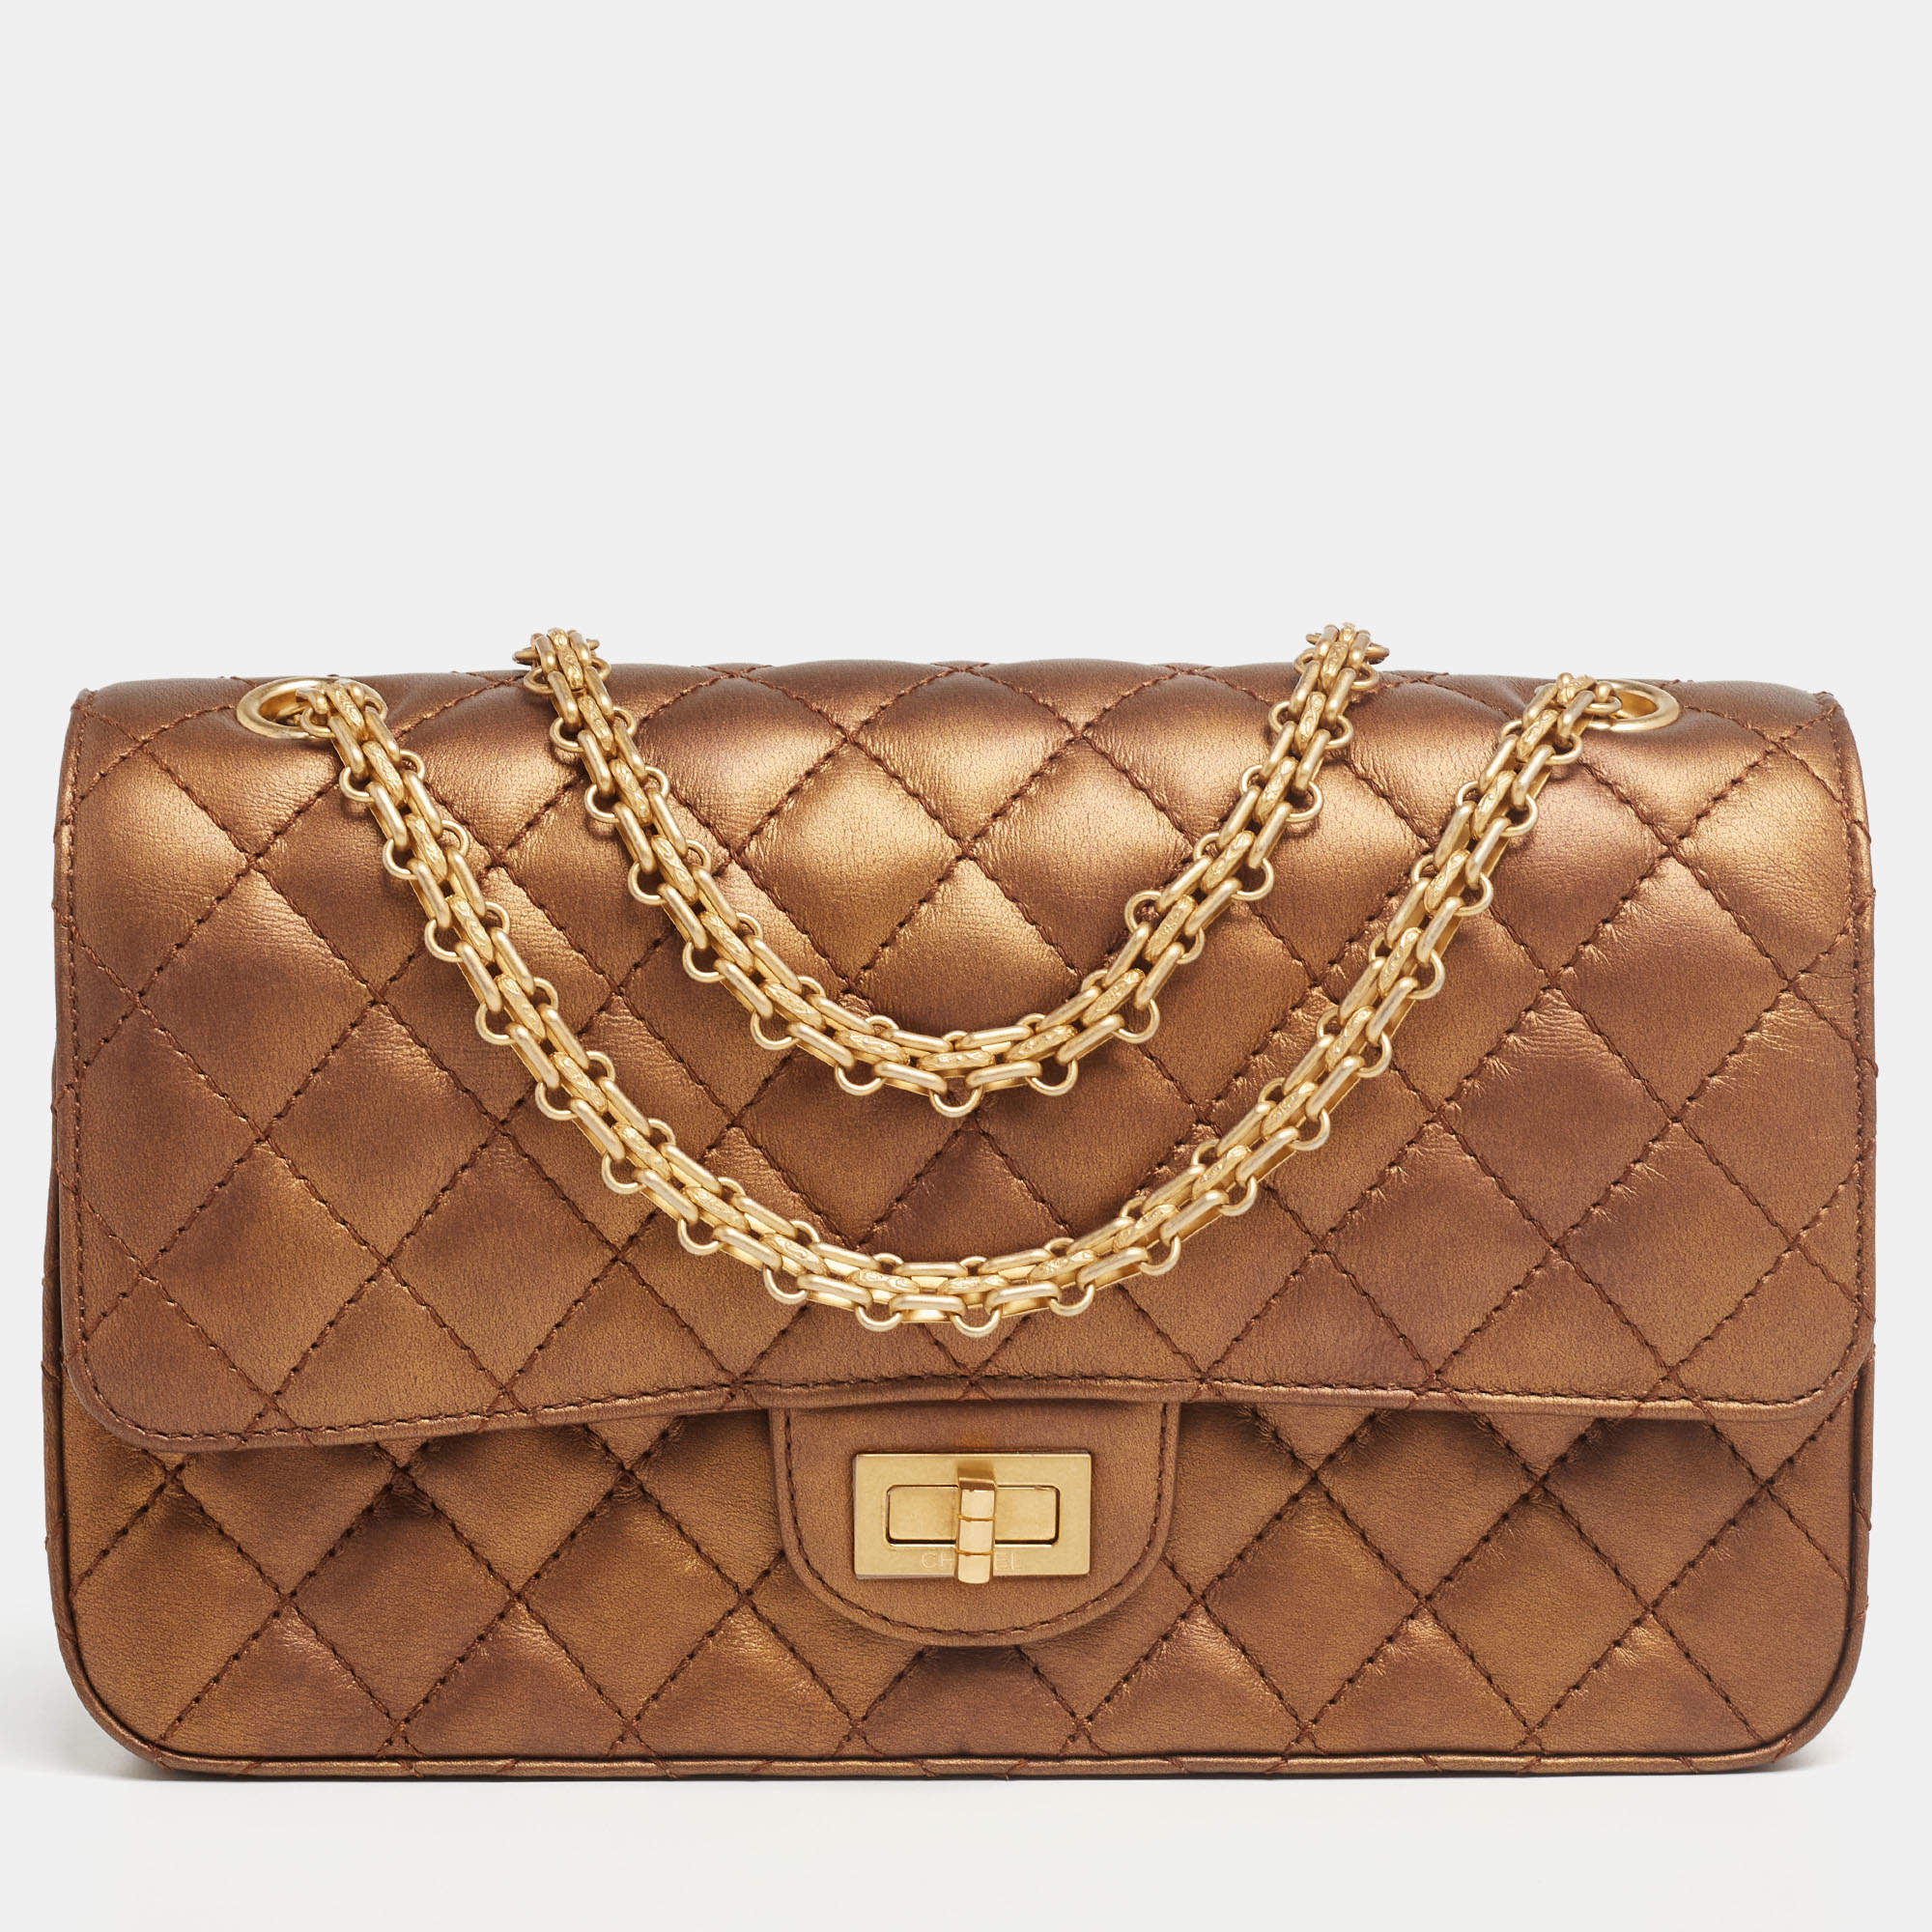 Chanel Metallic Bronze Quilted Leather  Reissue Classic 225 Flap Bag  Chanel | TLC